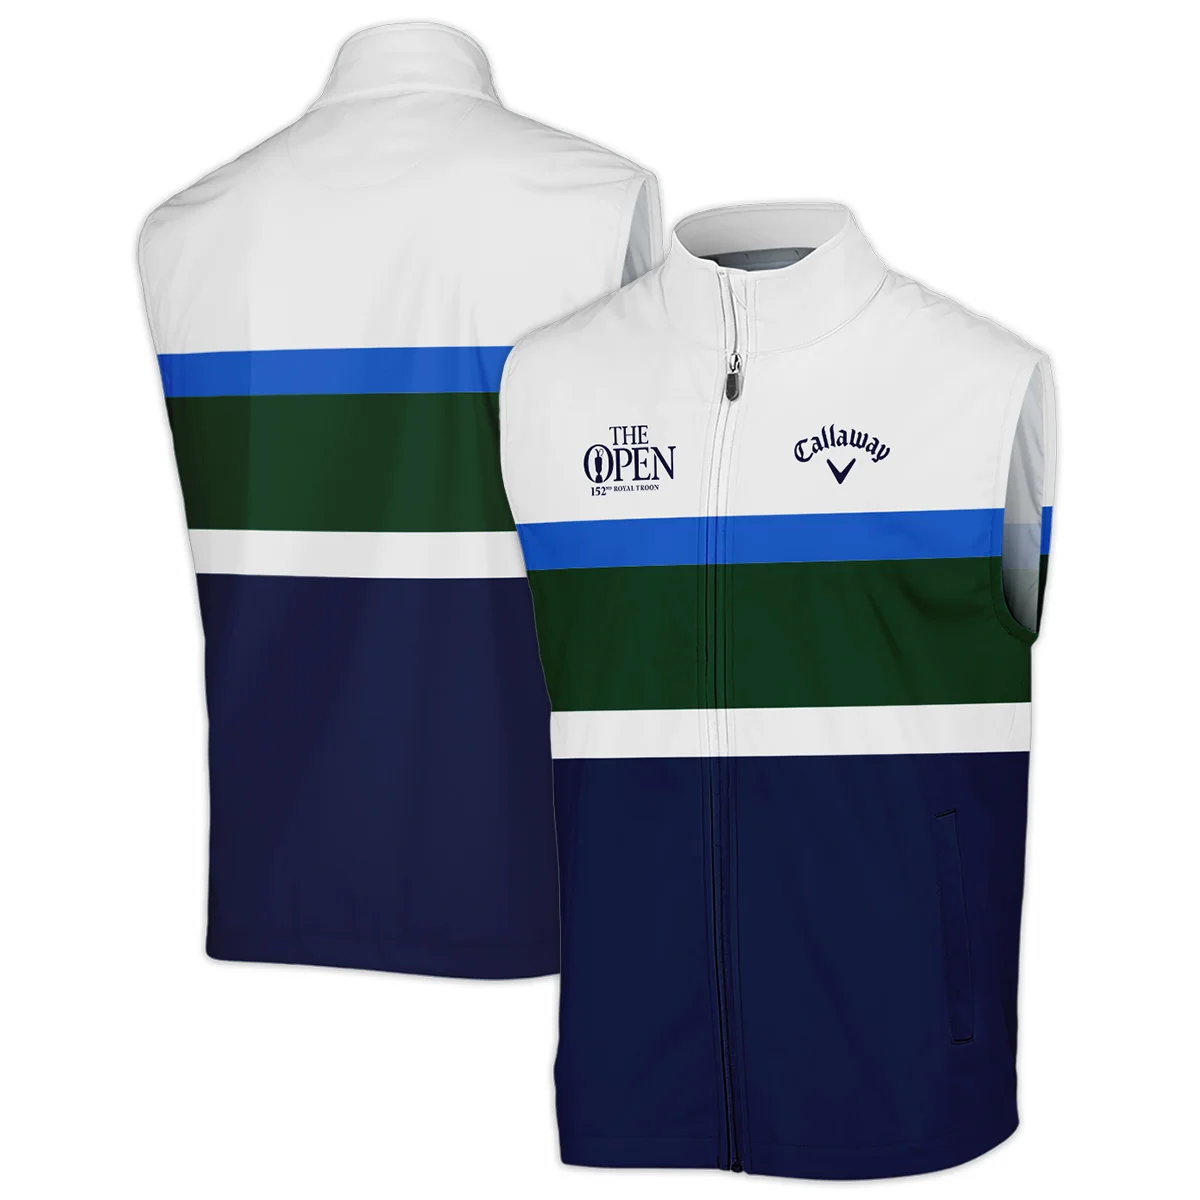 White Blue Green Background Callaway 152nd Open Championship Sleeveless Jacket All Over Prints HOTOP270624A01CLWSJK